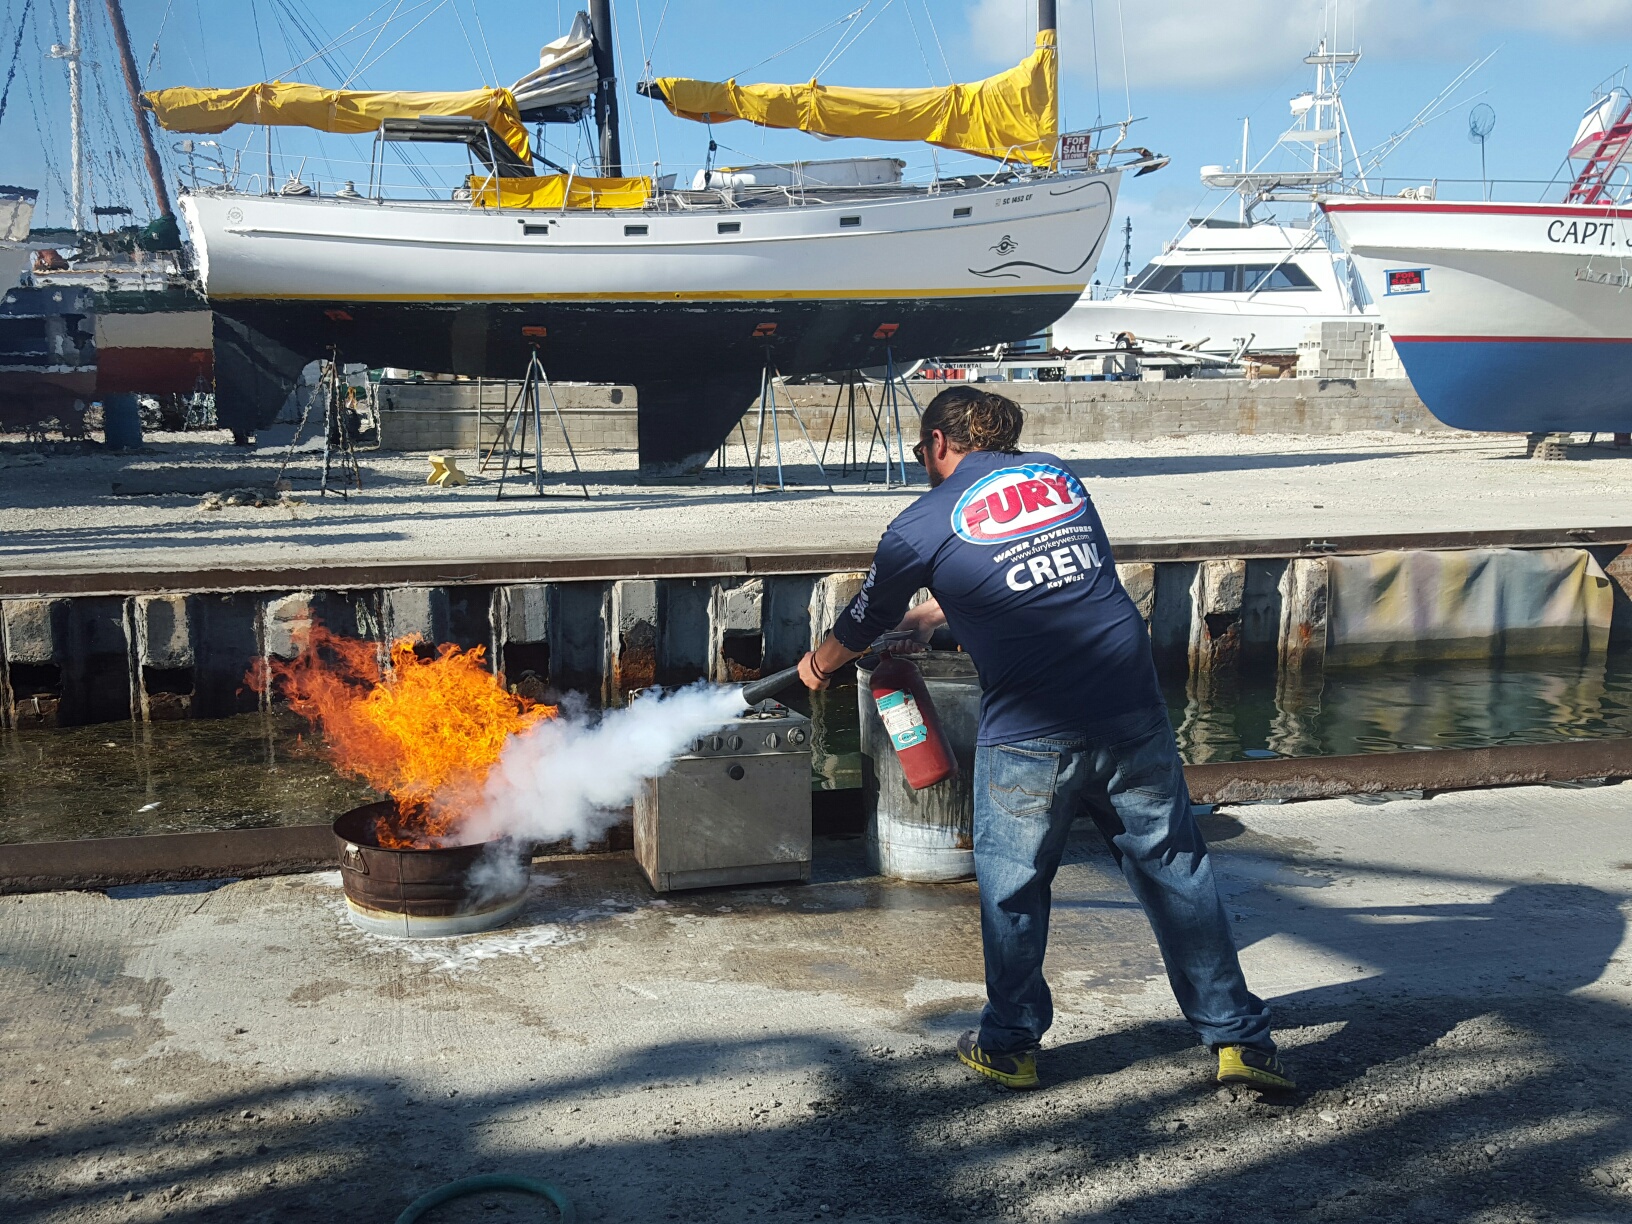 STCW Basic 5 day for unlimited size vessels   December 5-9th, 2022, 9am-5pm